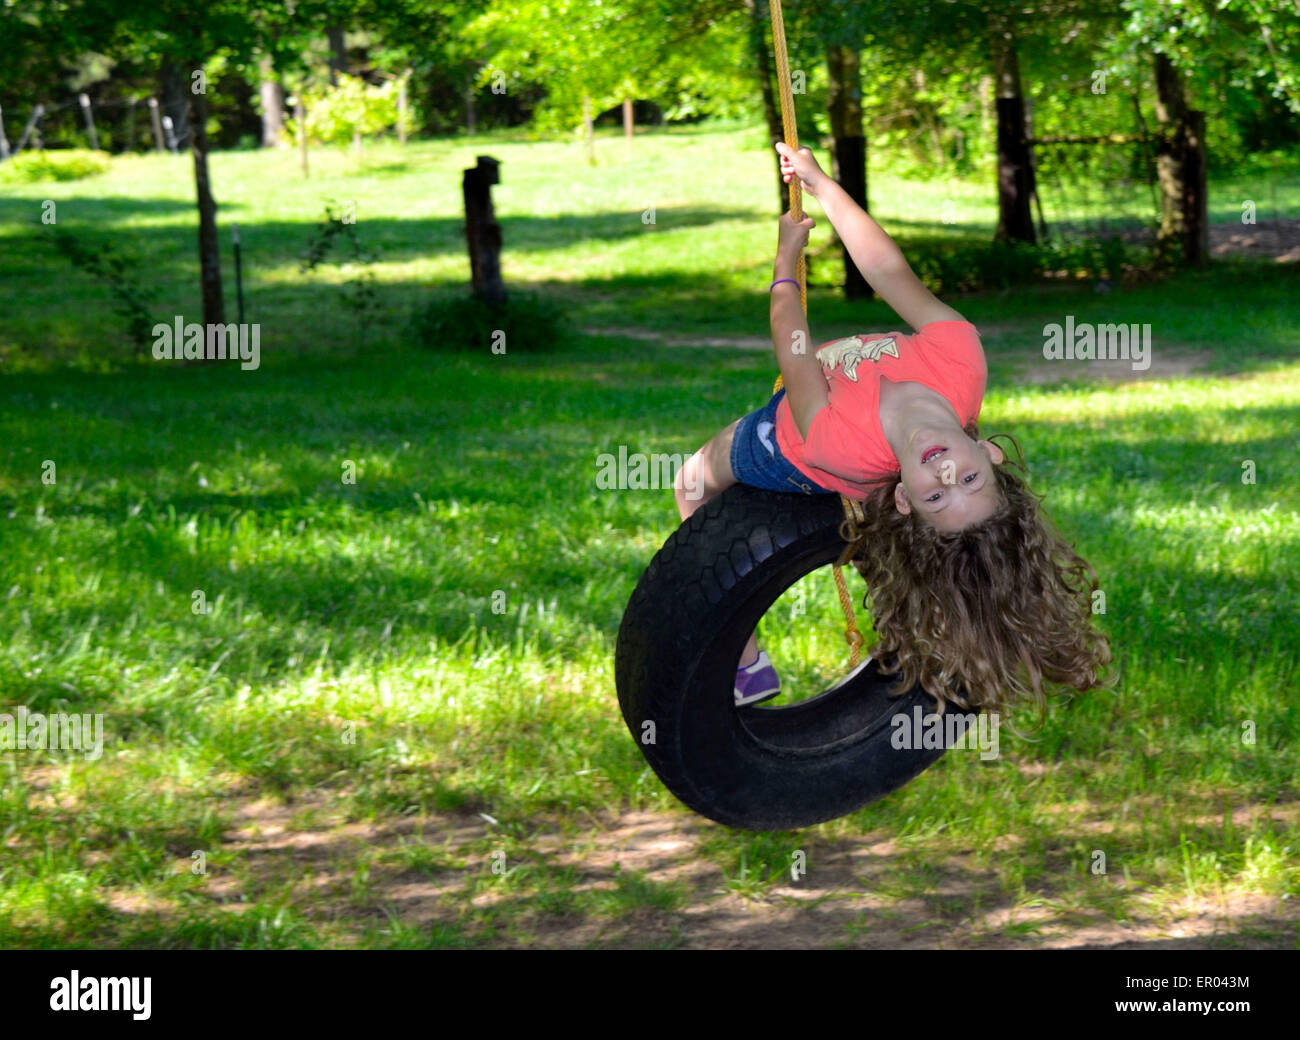 Young elementary aged girl swinging on a tire swing in the bright spring sunshine Stock Photo